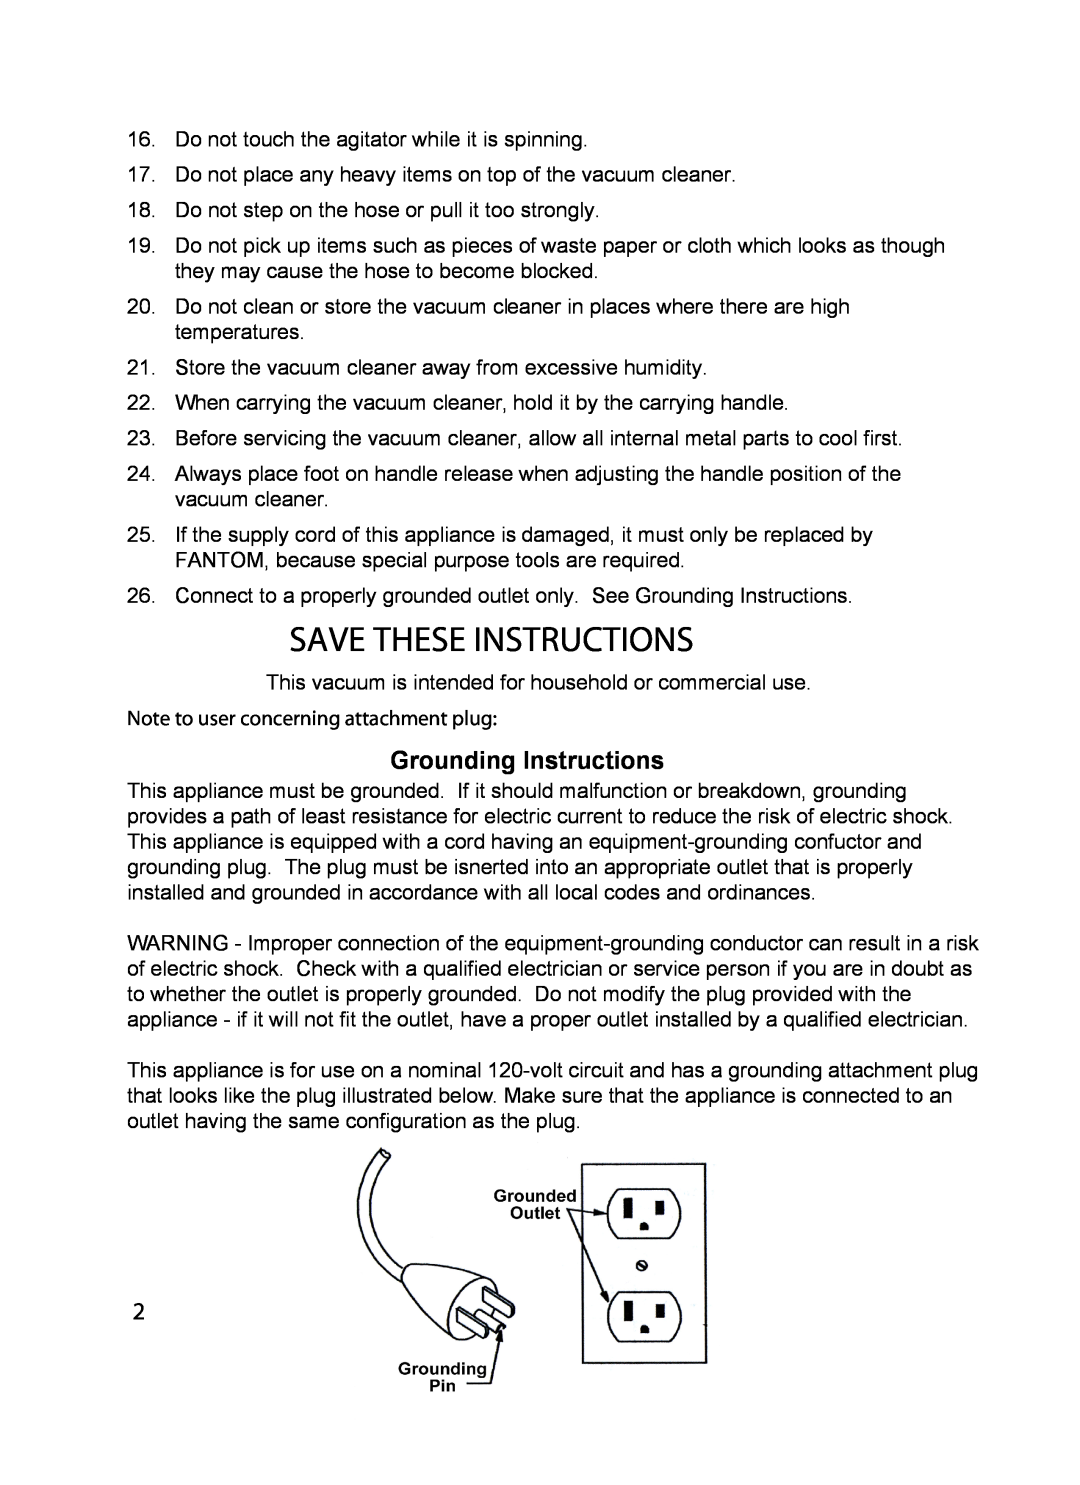 Fantom Vacuum FM742C Save These Instructions, Grounding Instructions, Note to user concerning attachment plug 